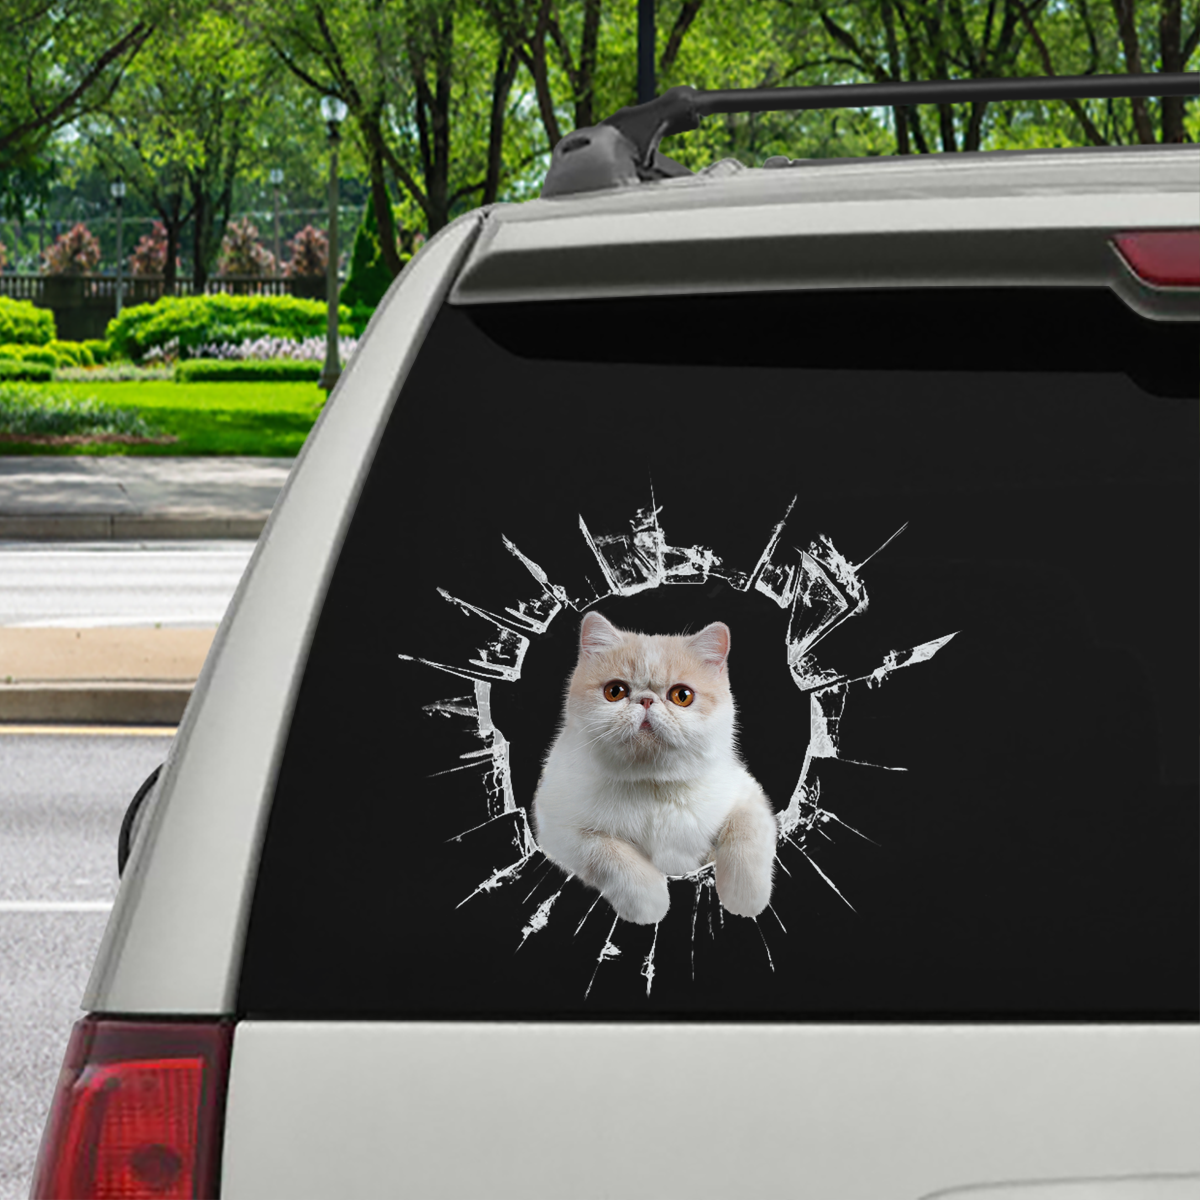 Get In - It's Time For Shopping - Exotic Cat Car Sticker V1